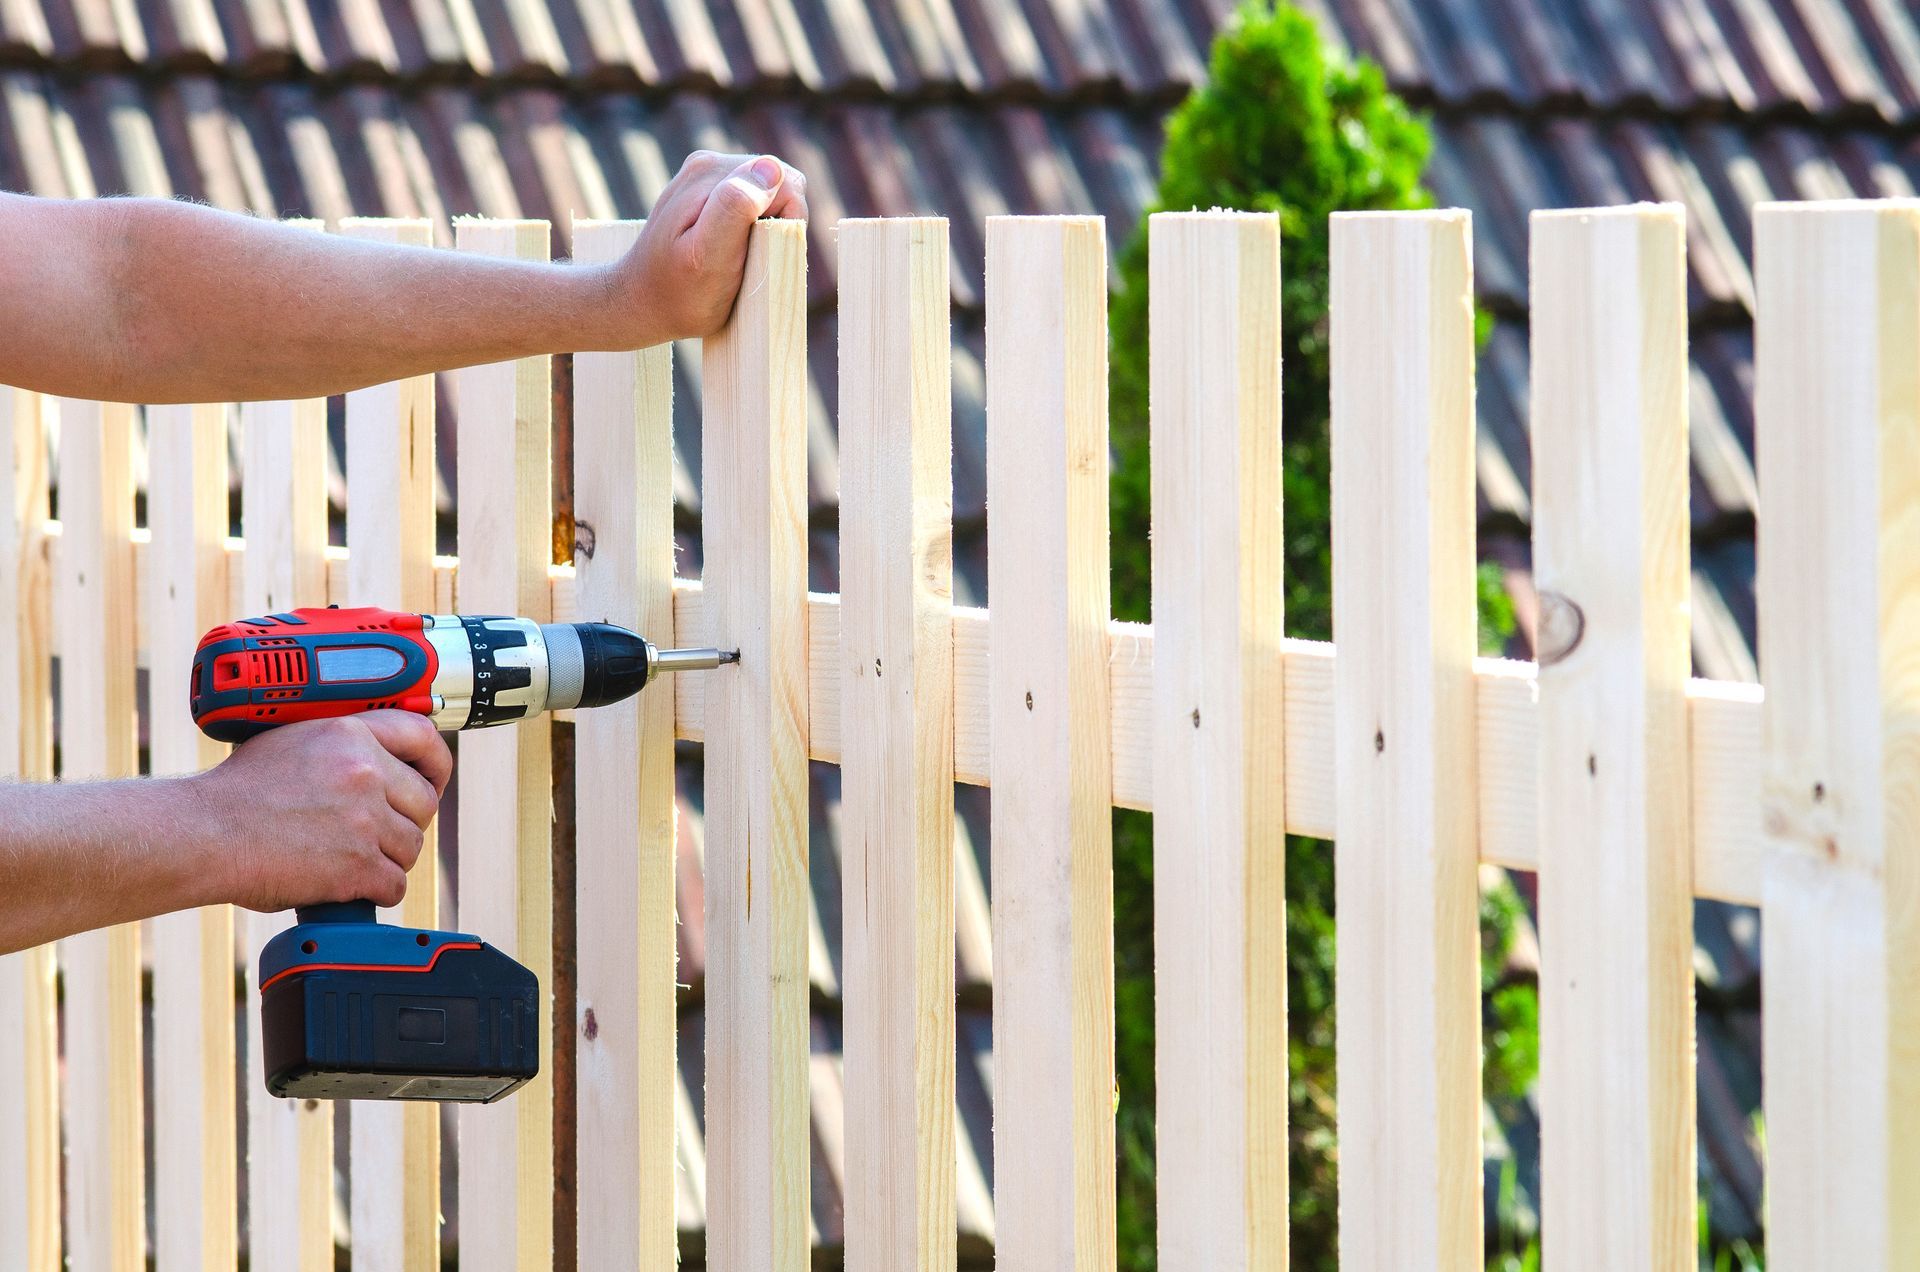 A hand screwing a wood plank to metal construction with a drill and screw, building a wooden fence.